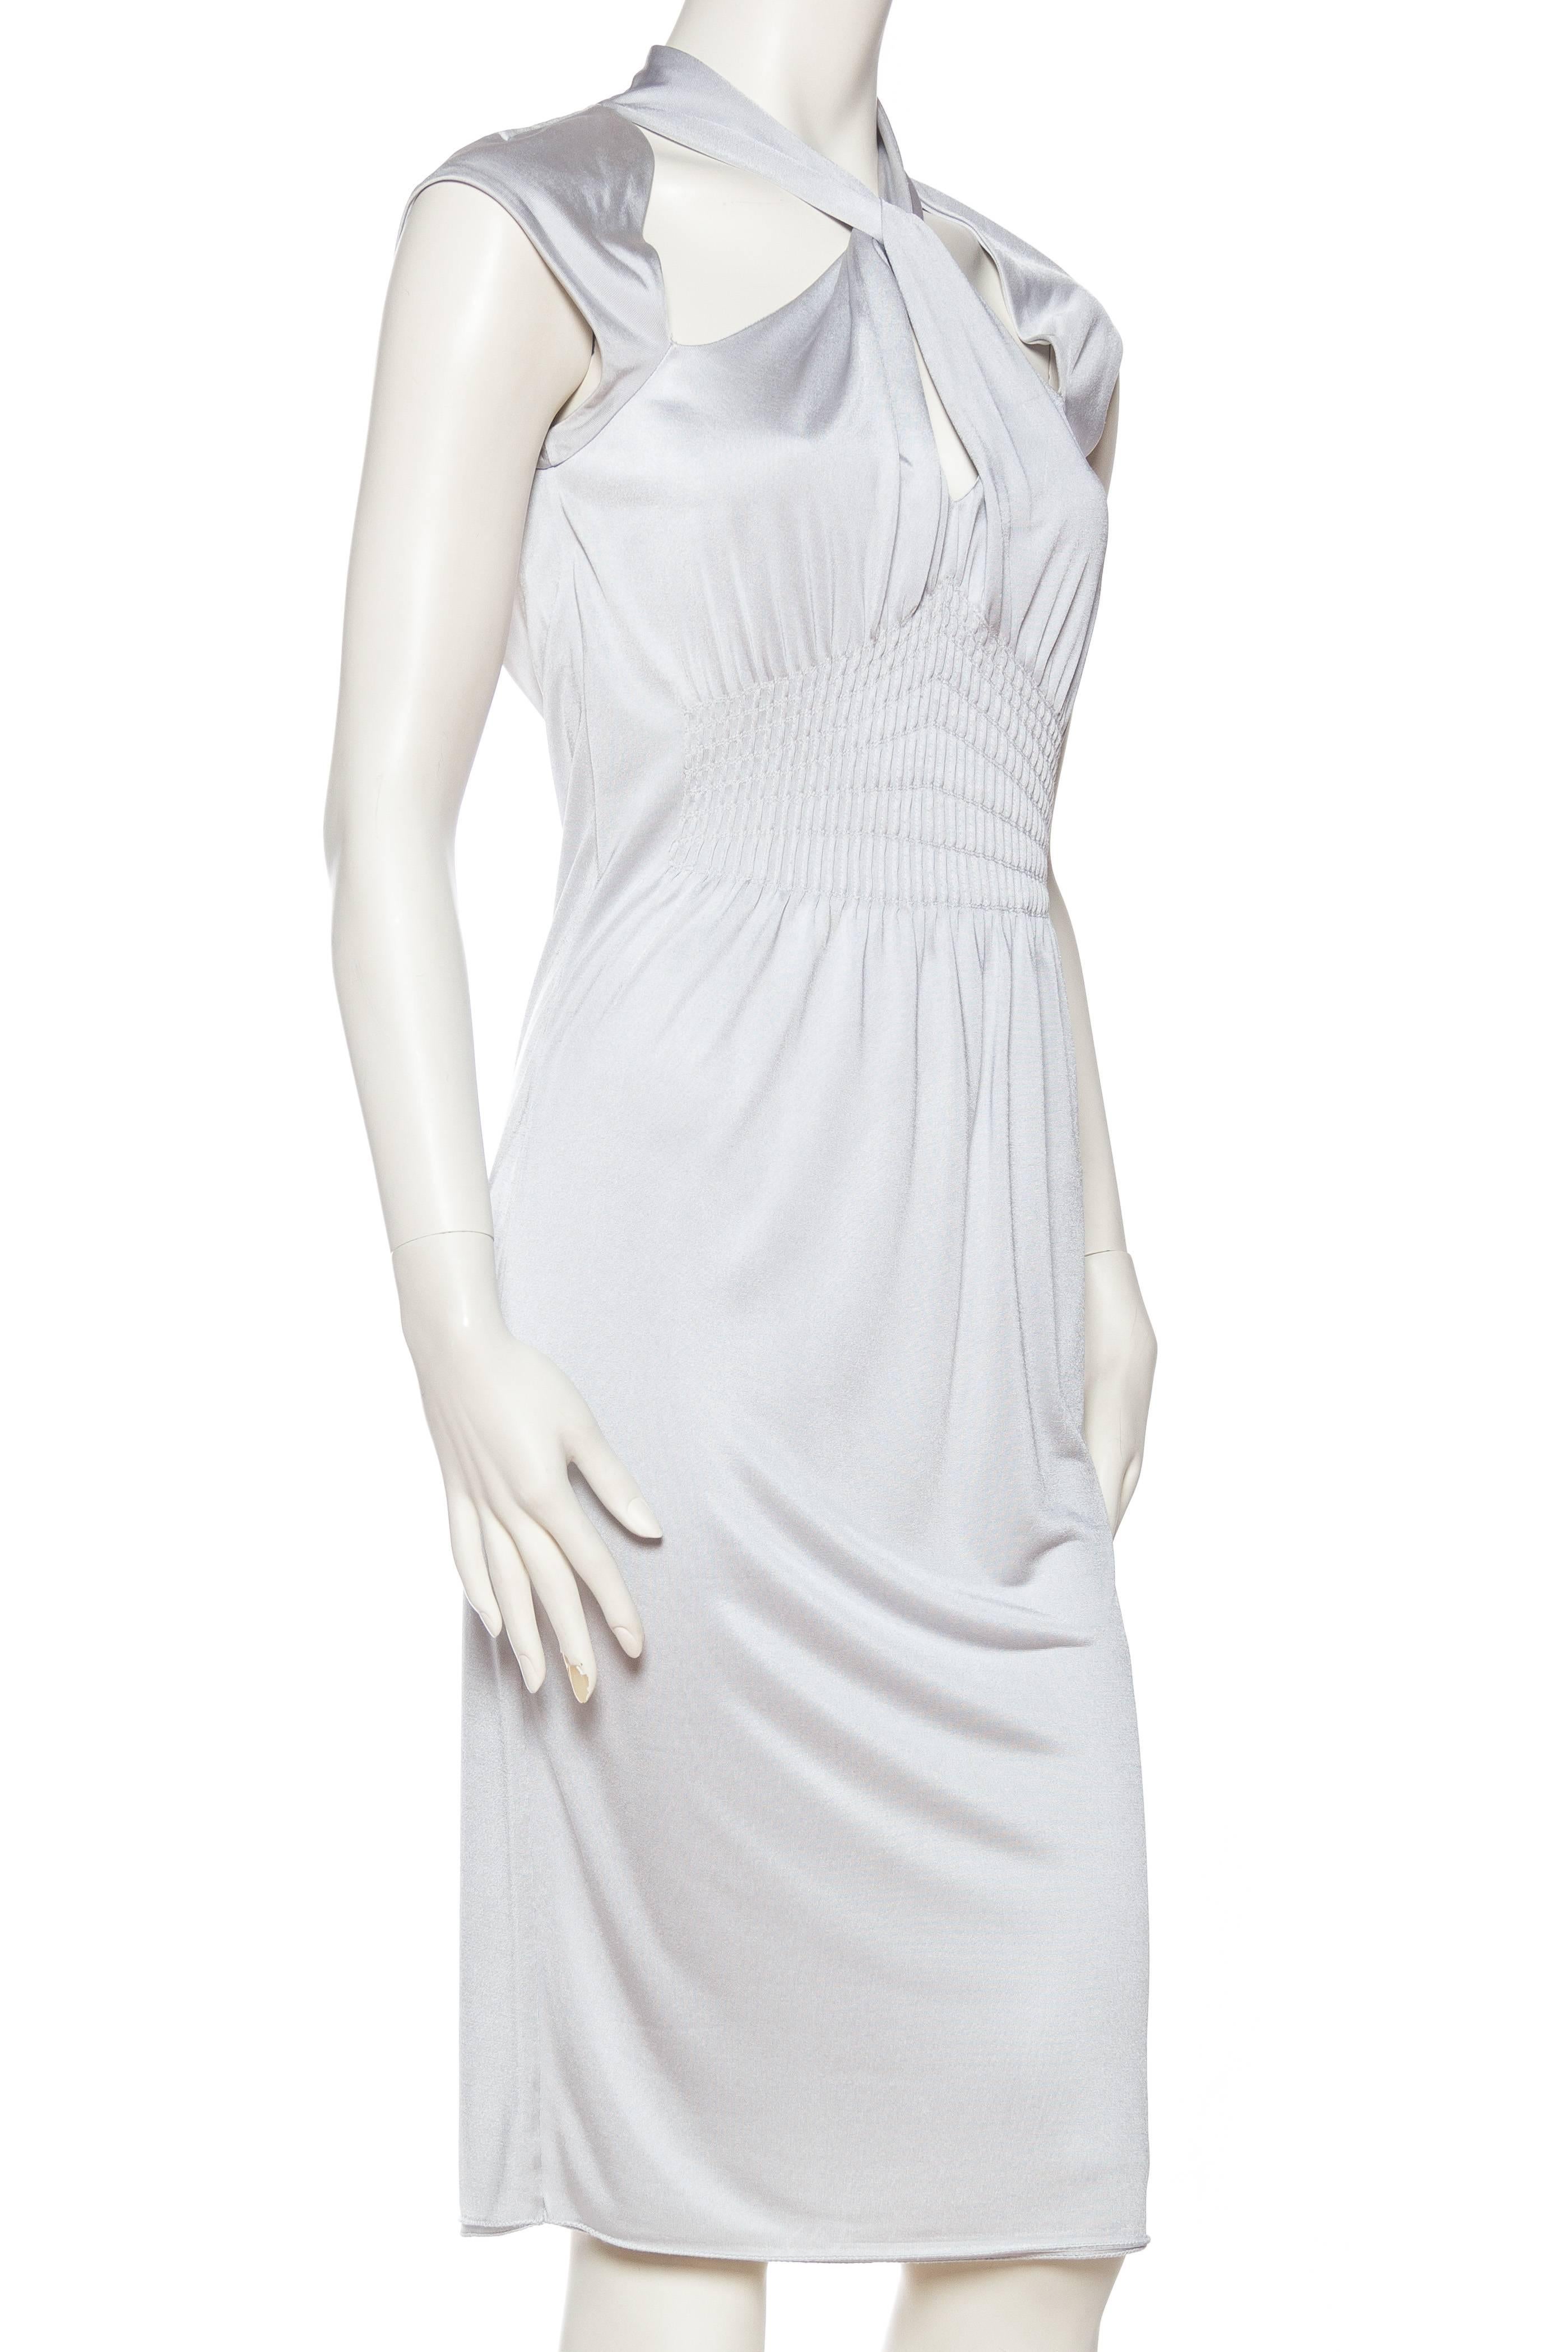 Women's 2000S TOM FORD GUCCI Dove Grey Rayon Jersey Backless Dress